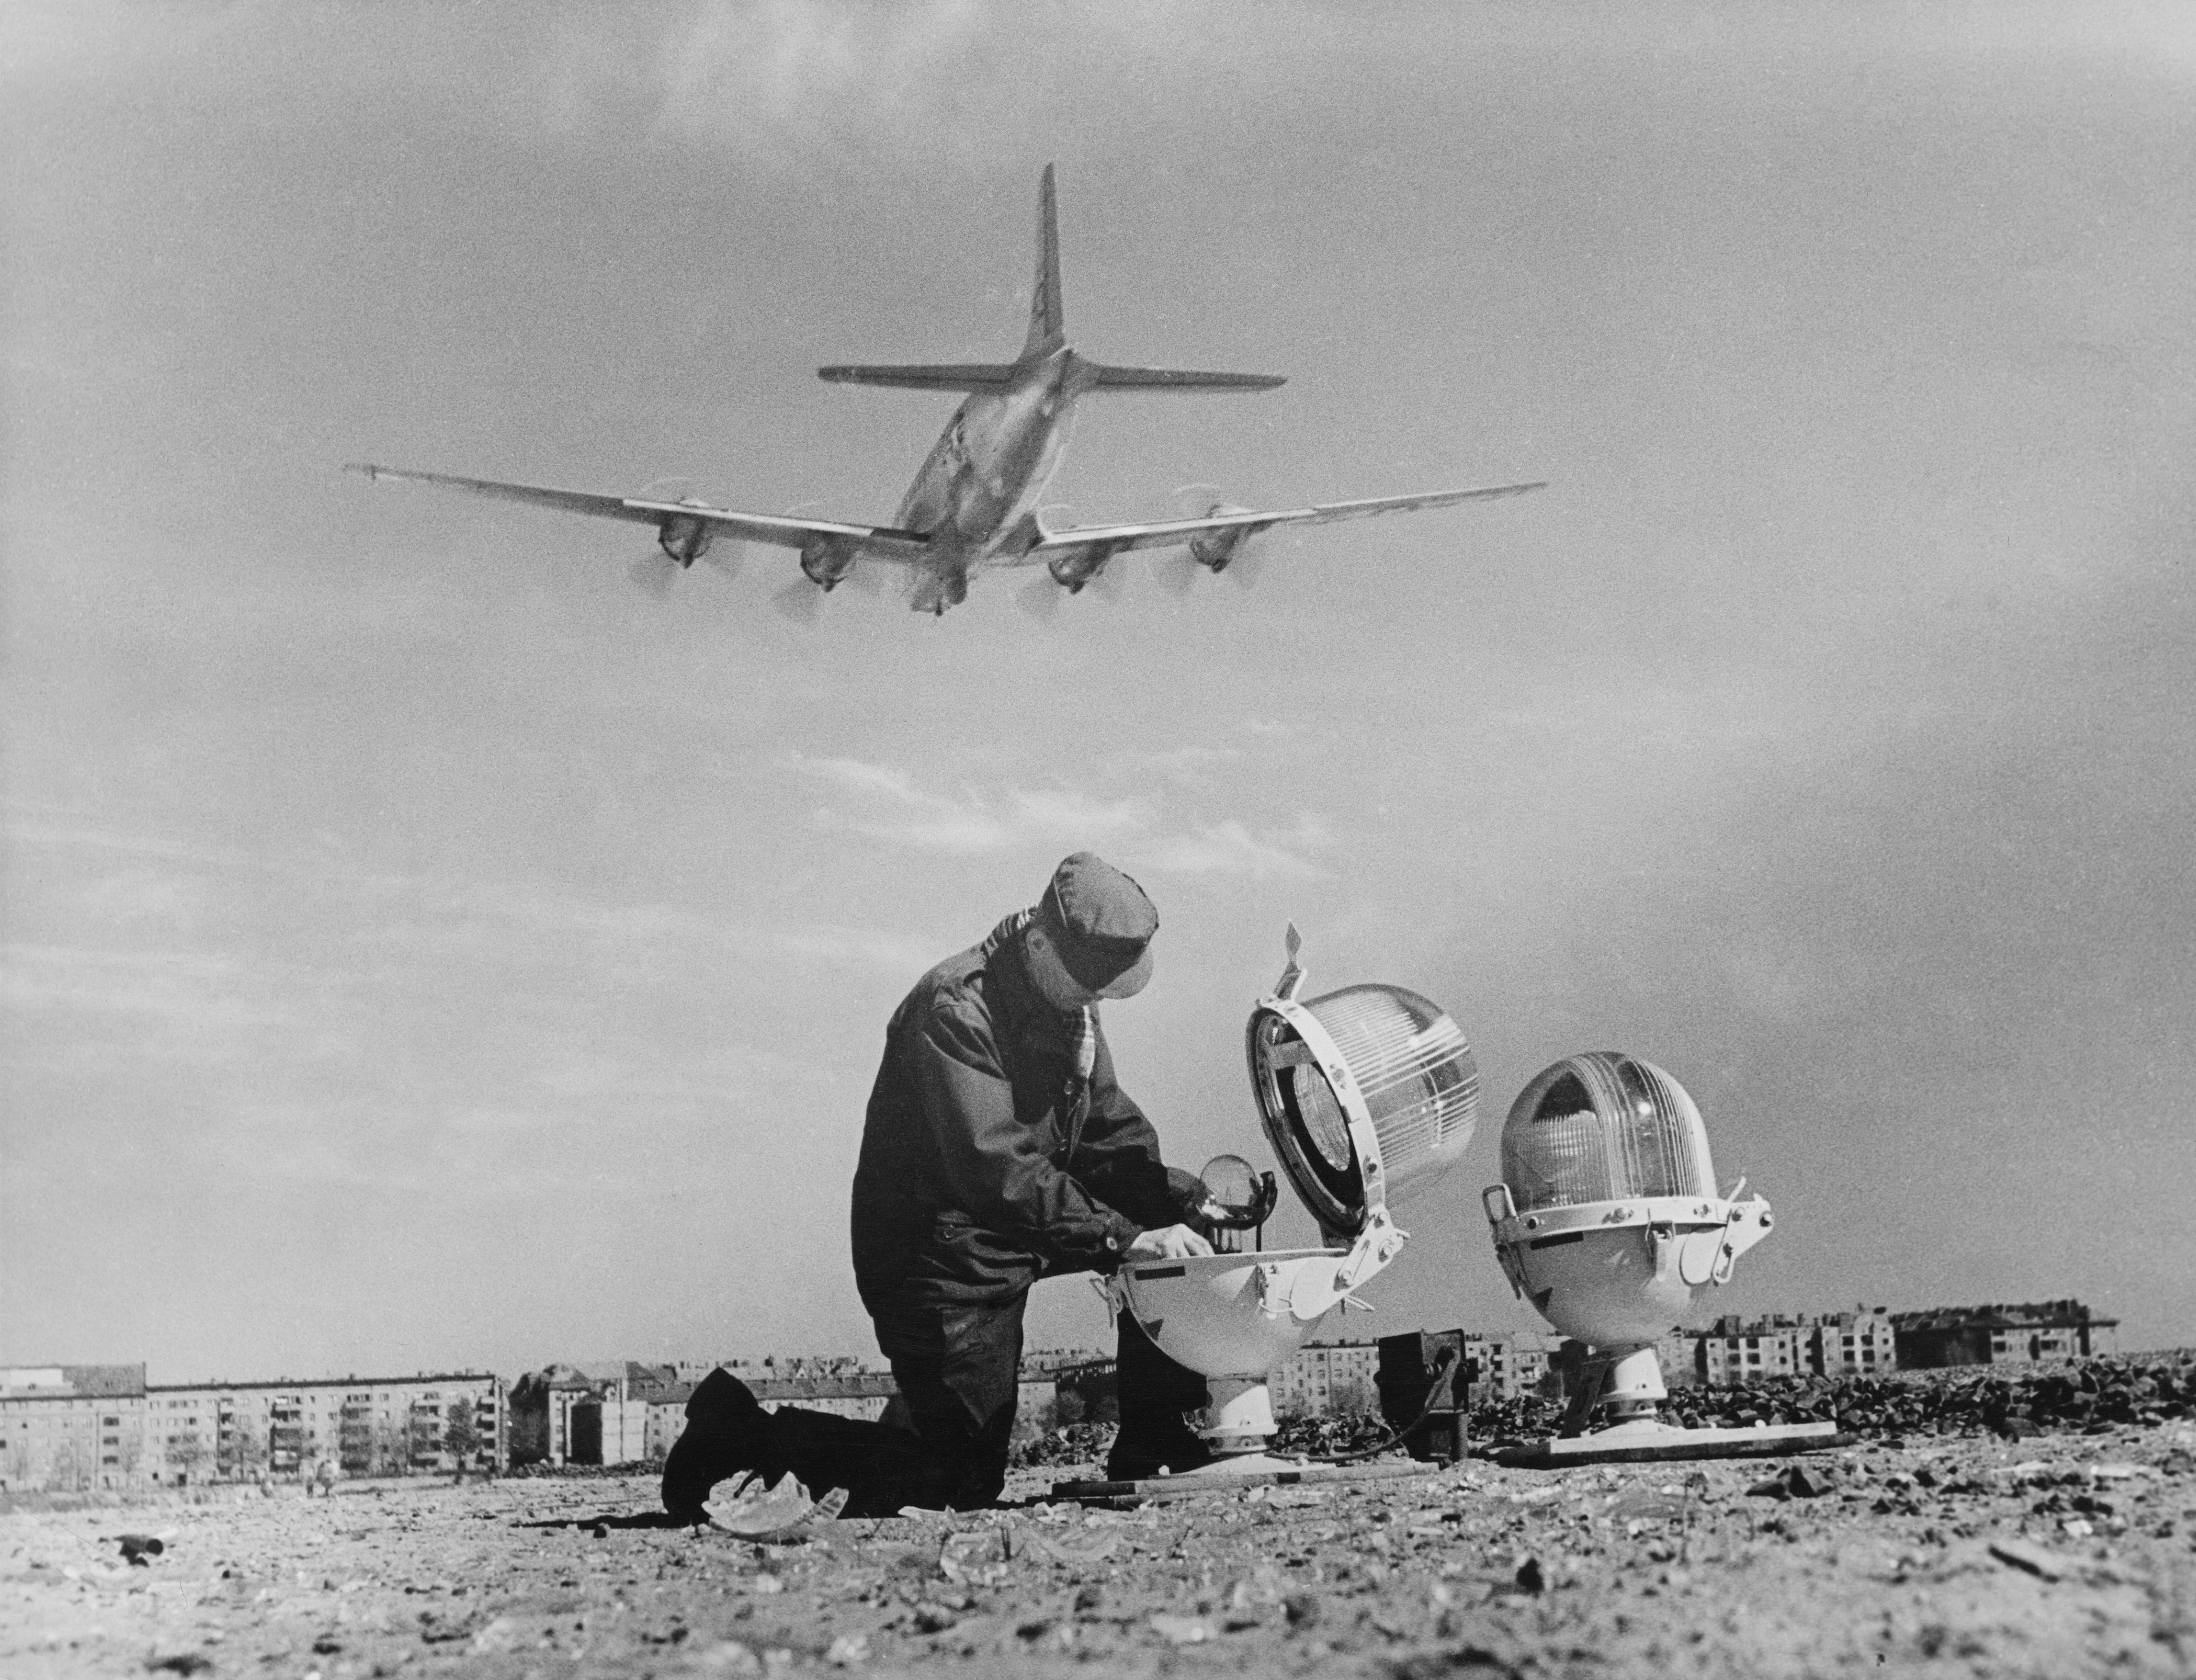 An engineer repairs a landing light at Tempelhof Airport during the Berlin Airlift in April 1949